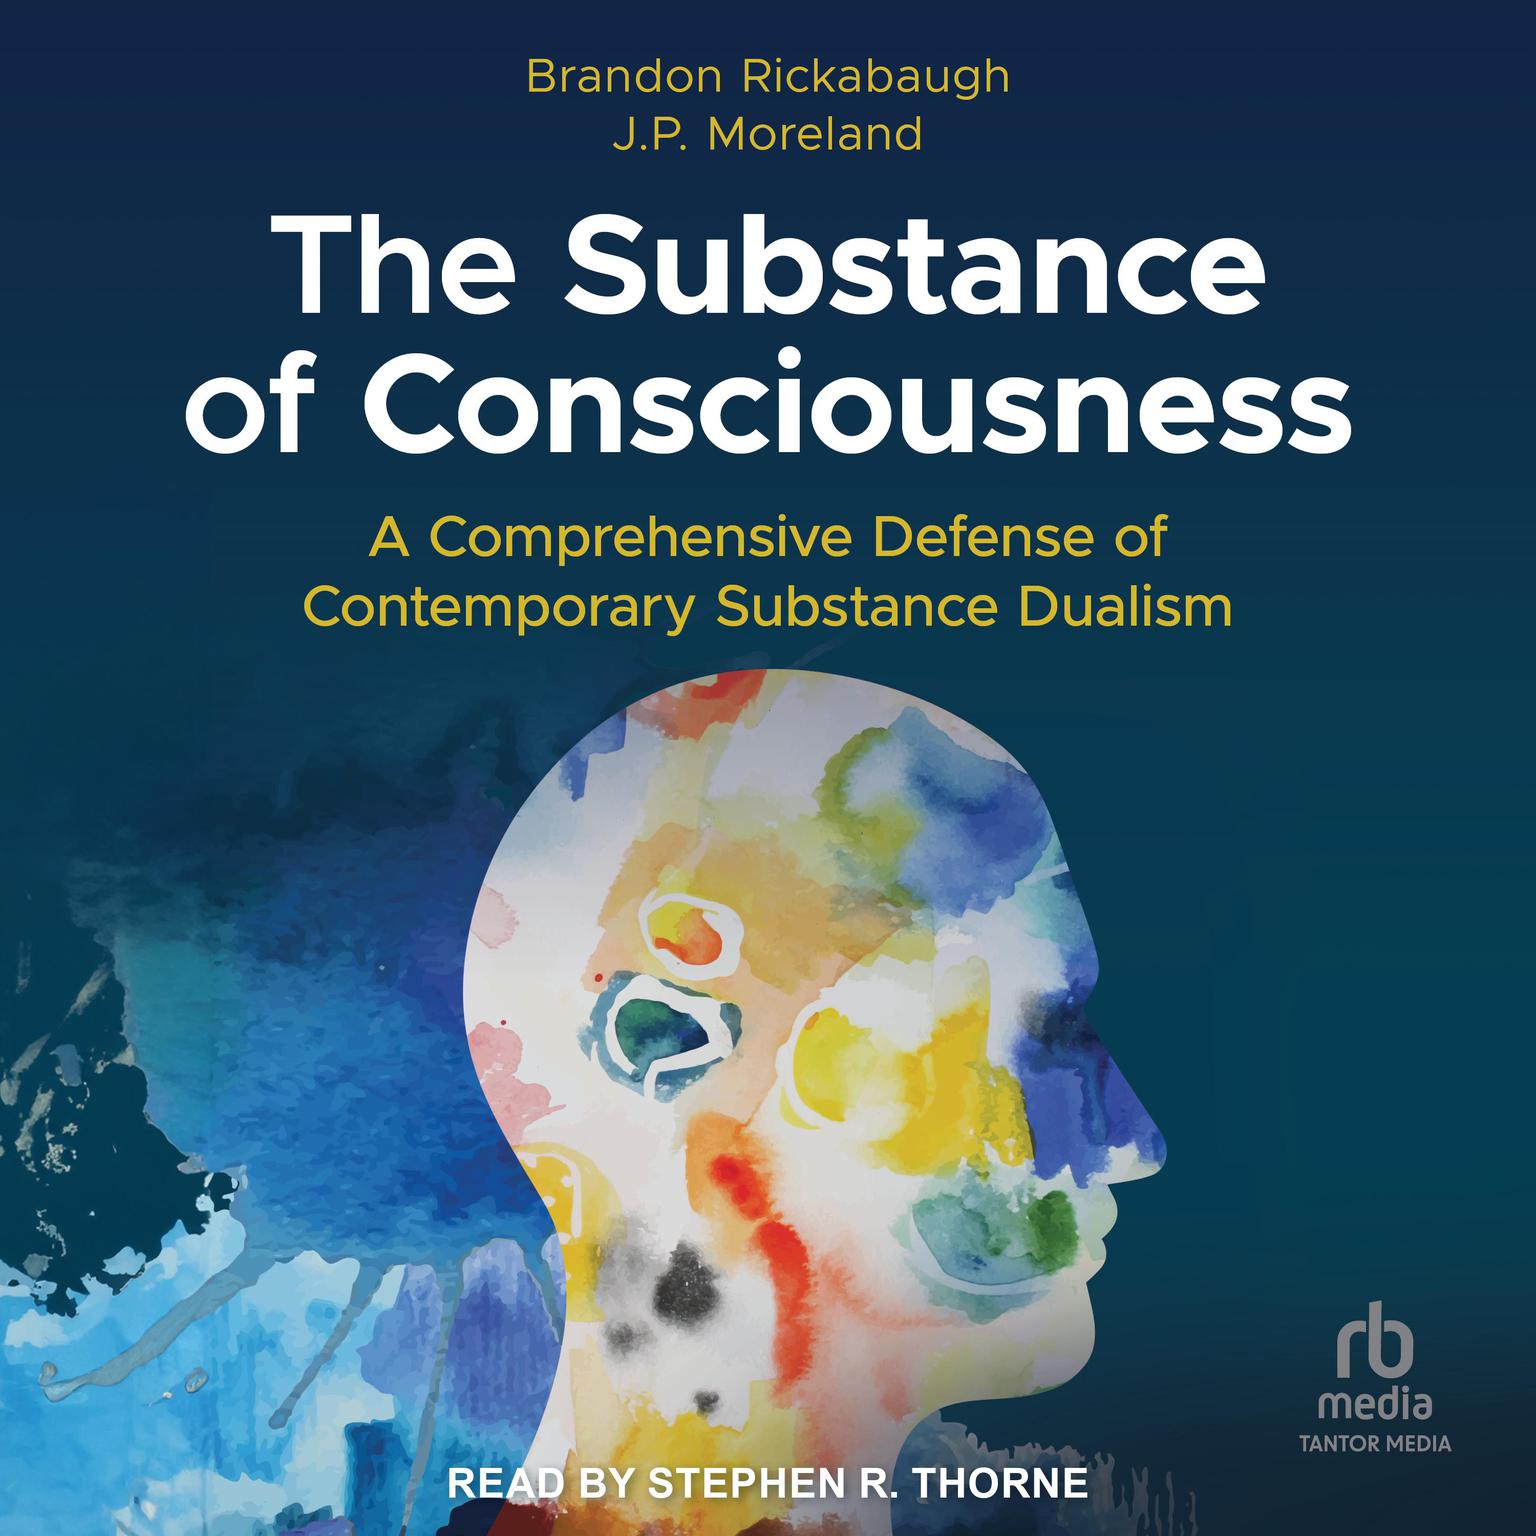 The Substance of Consciousness: A Comprehensive Defense of Contemporary Substance Dualism Audiobook, by J. P. Moreland